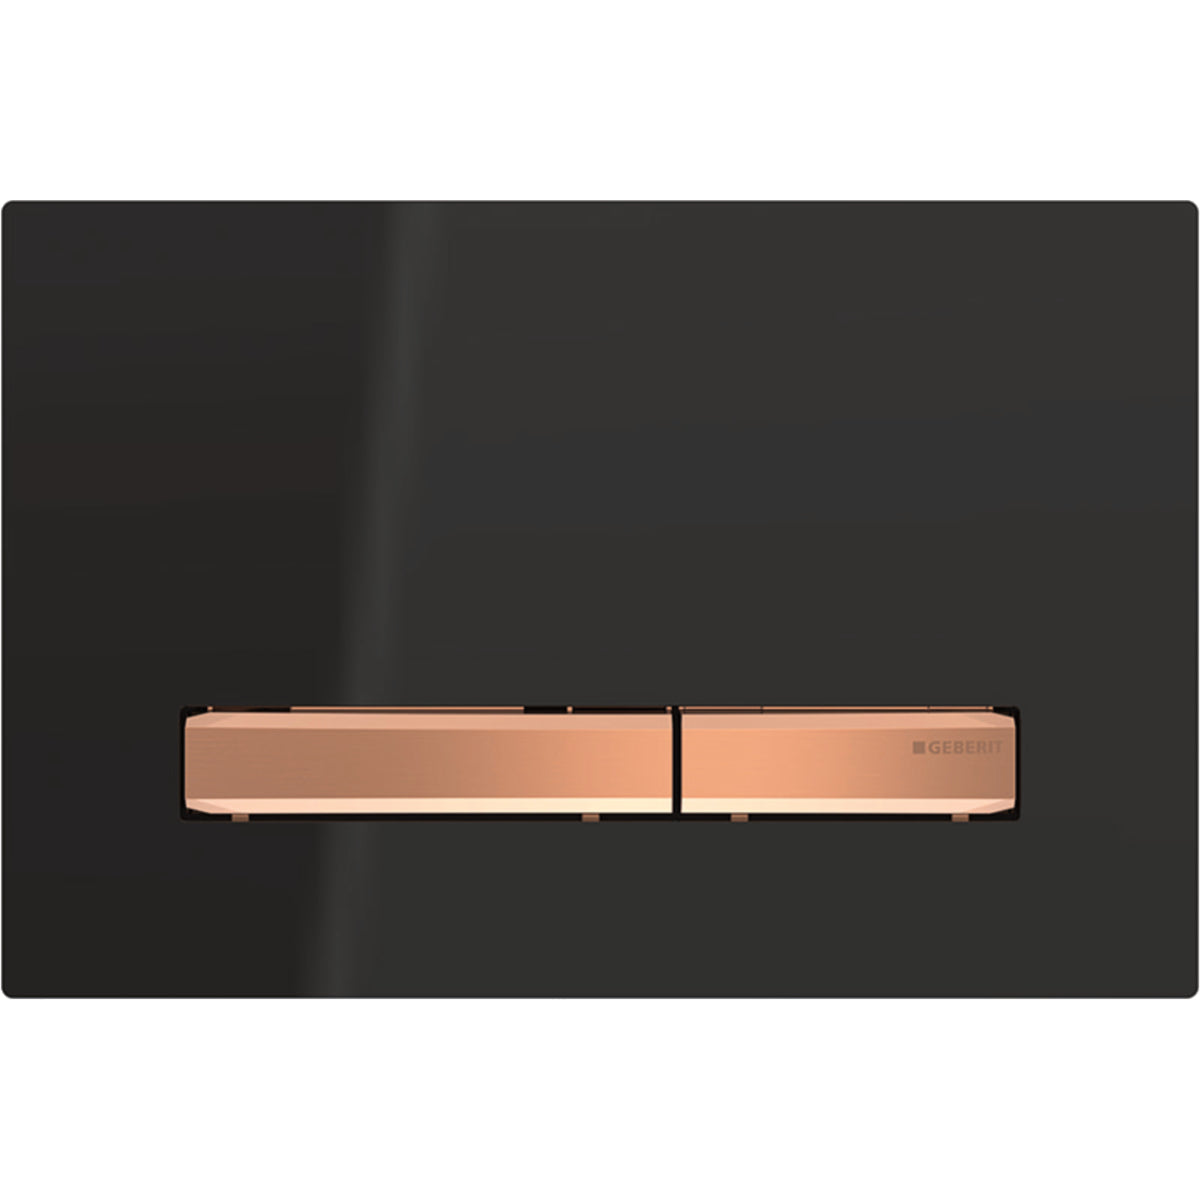 Geberit 115.670.DW.2- Geberit actuator plate Sigma50 for dual flush, metal colour red gold: red gold, black - FaucetExpress.ca